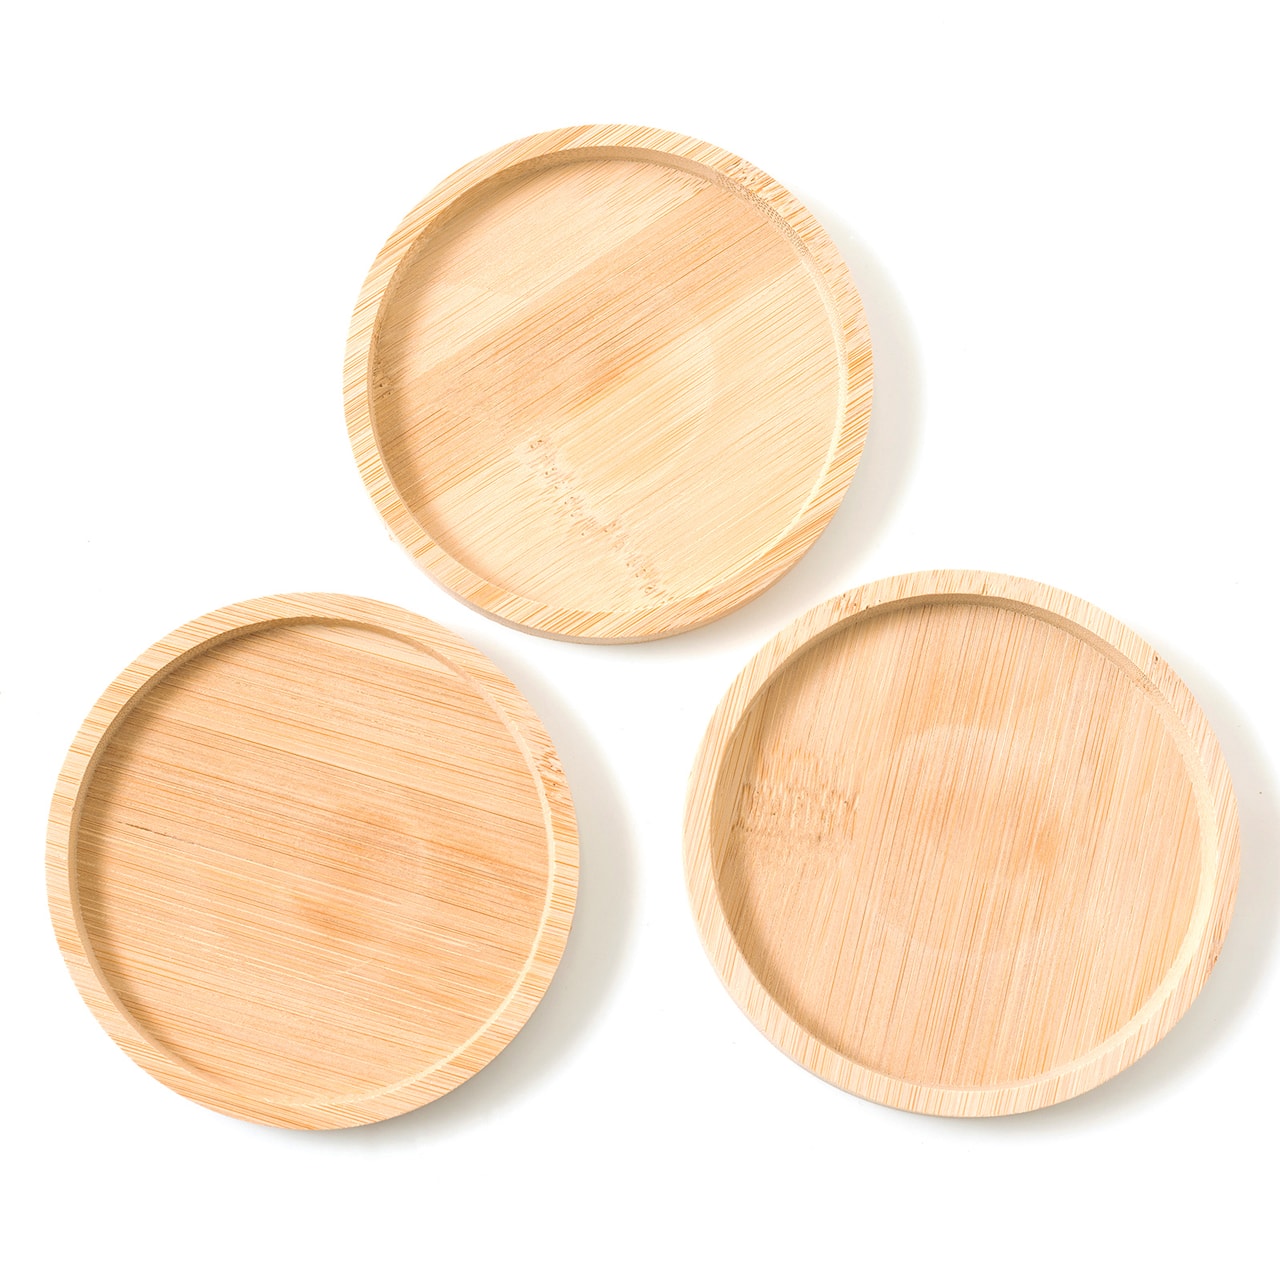 Wood Coaster Trays by Craft Smart®, 3ct.